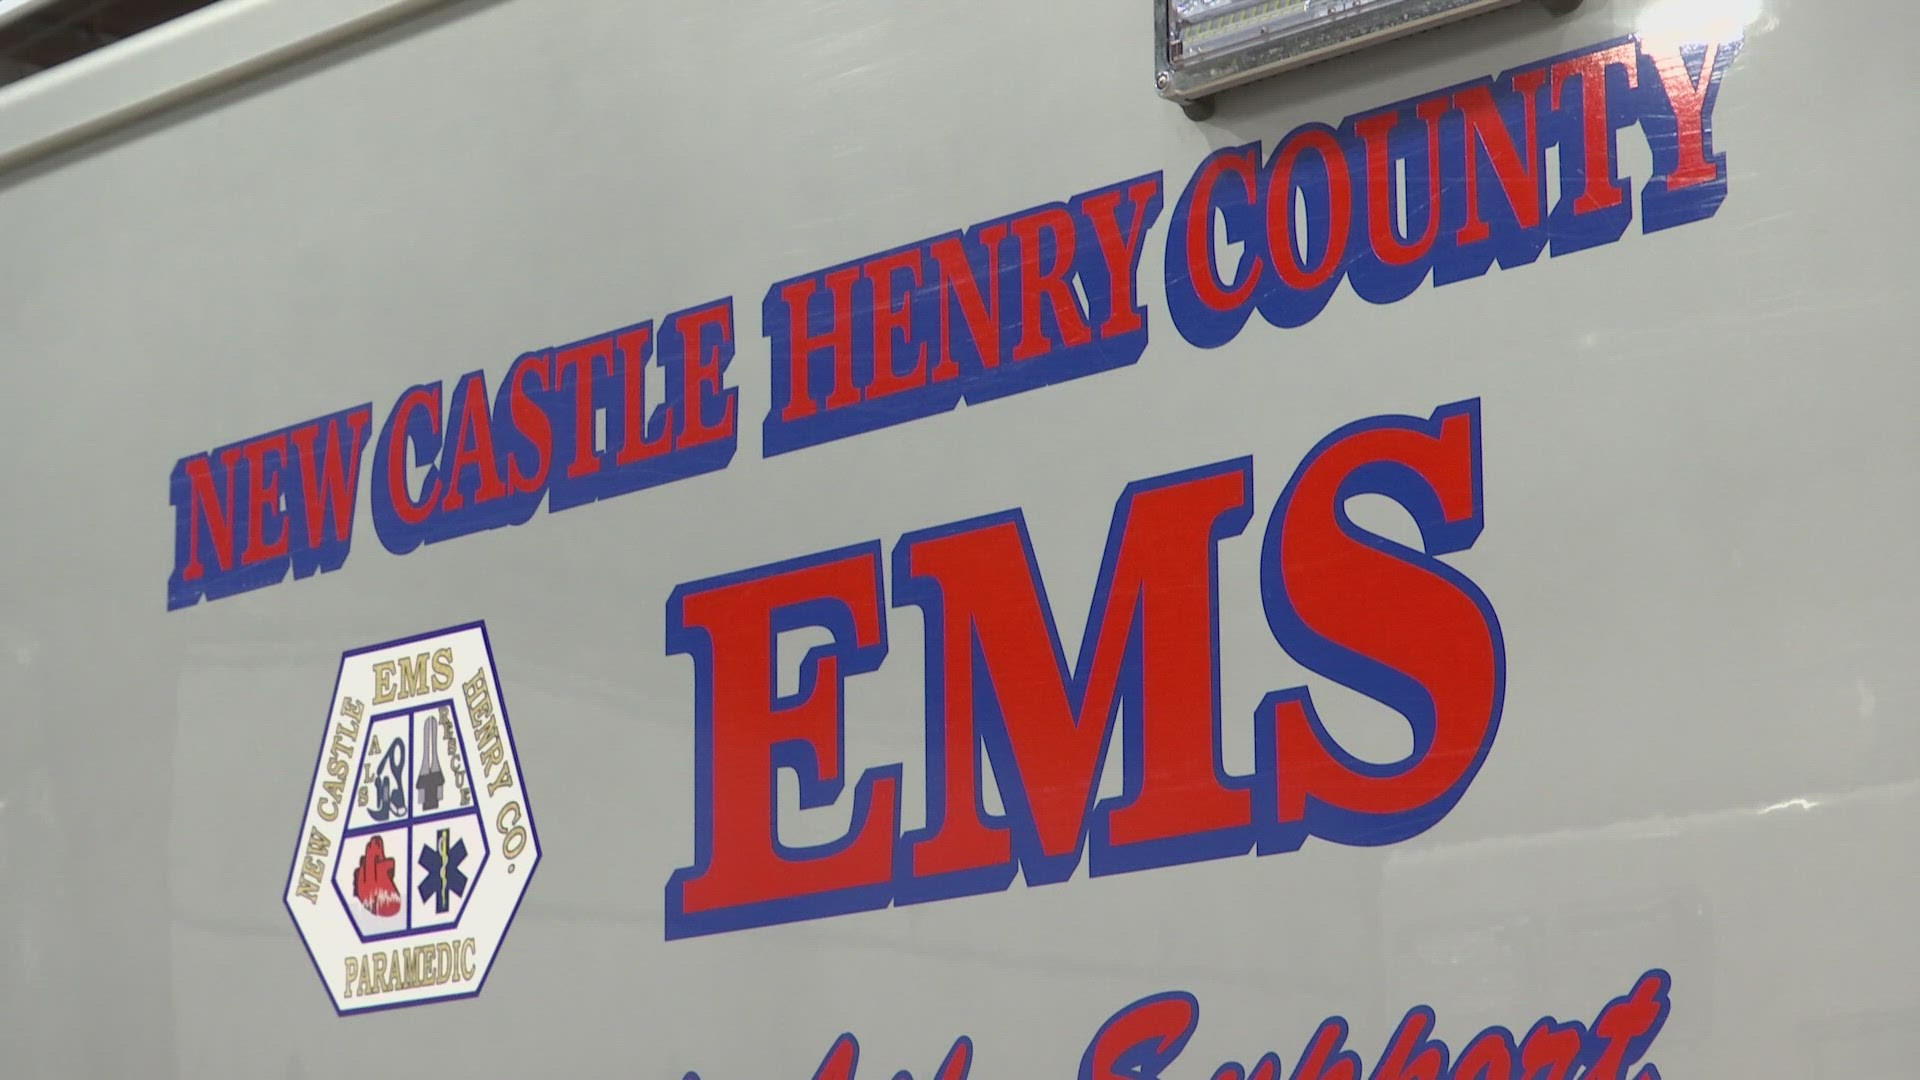 13News reporter Samantha Johnson breaks down how New Castle Henry County EMS is using whole blood to help in emergencies.